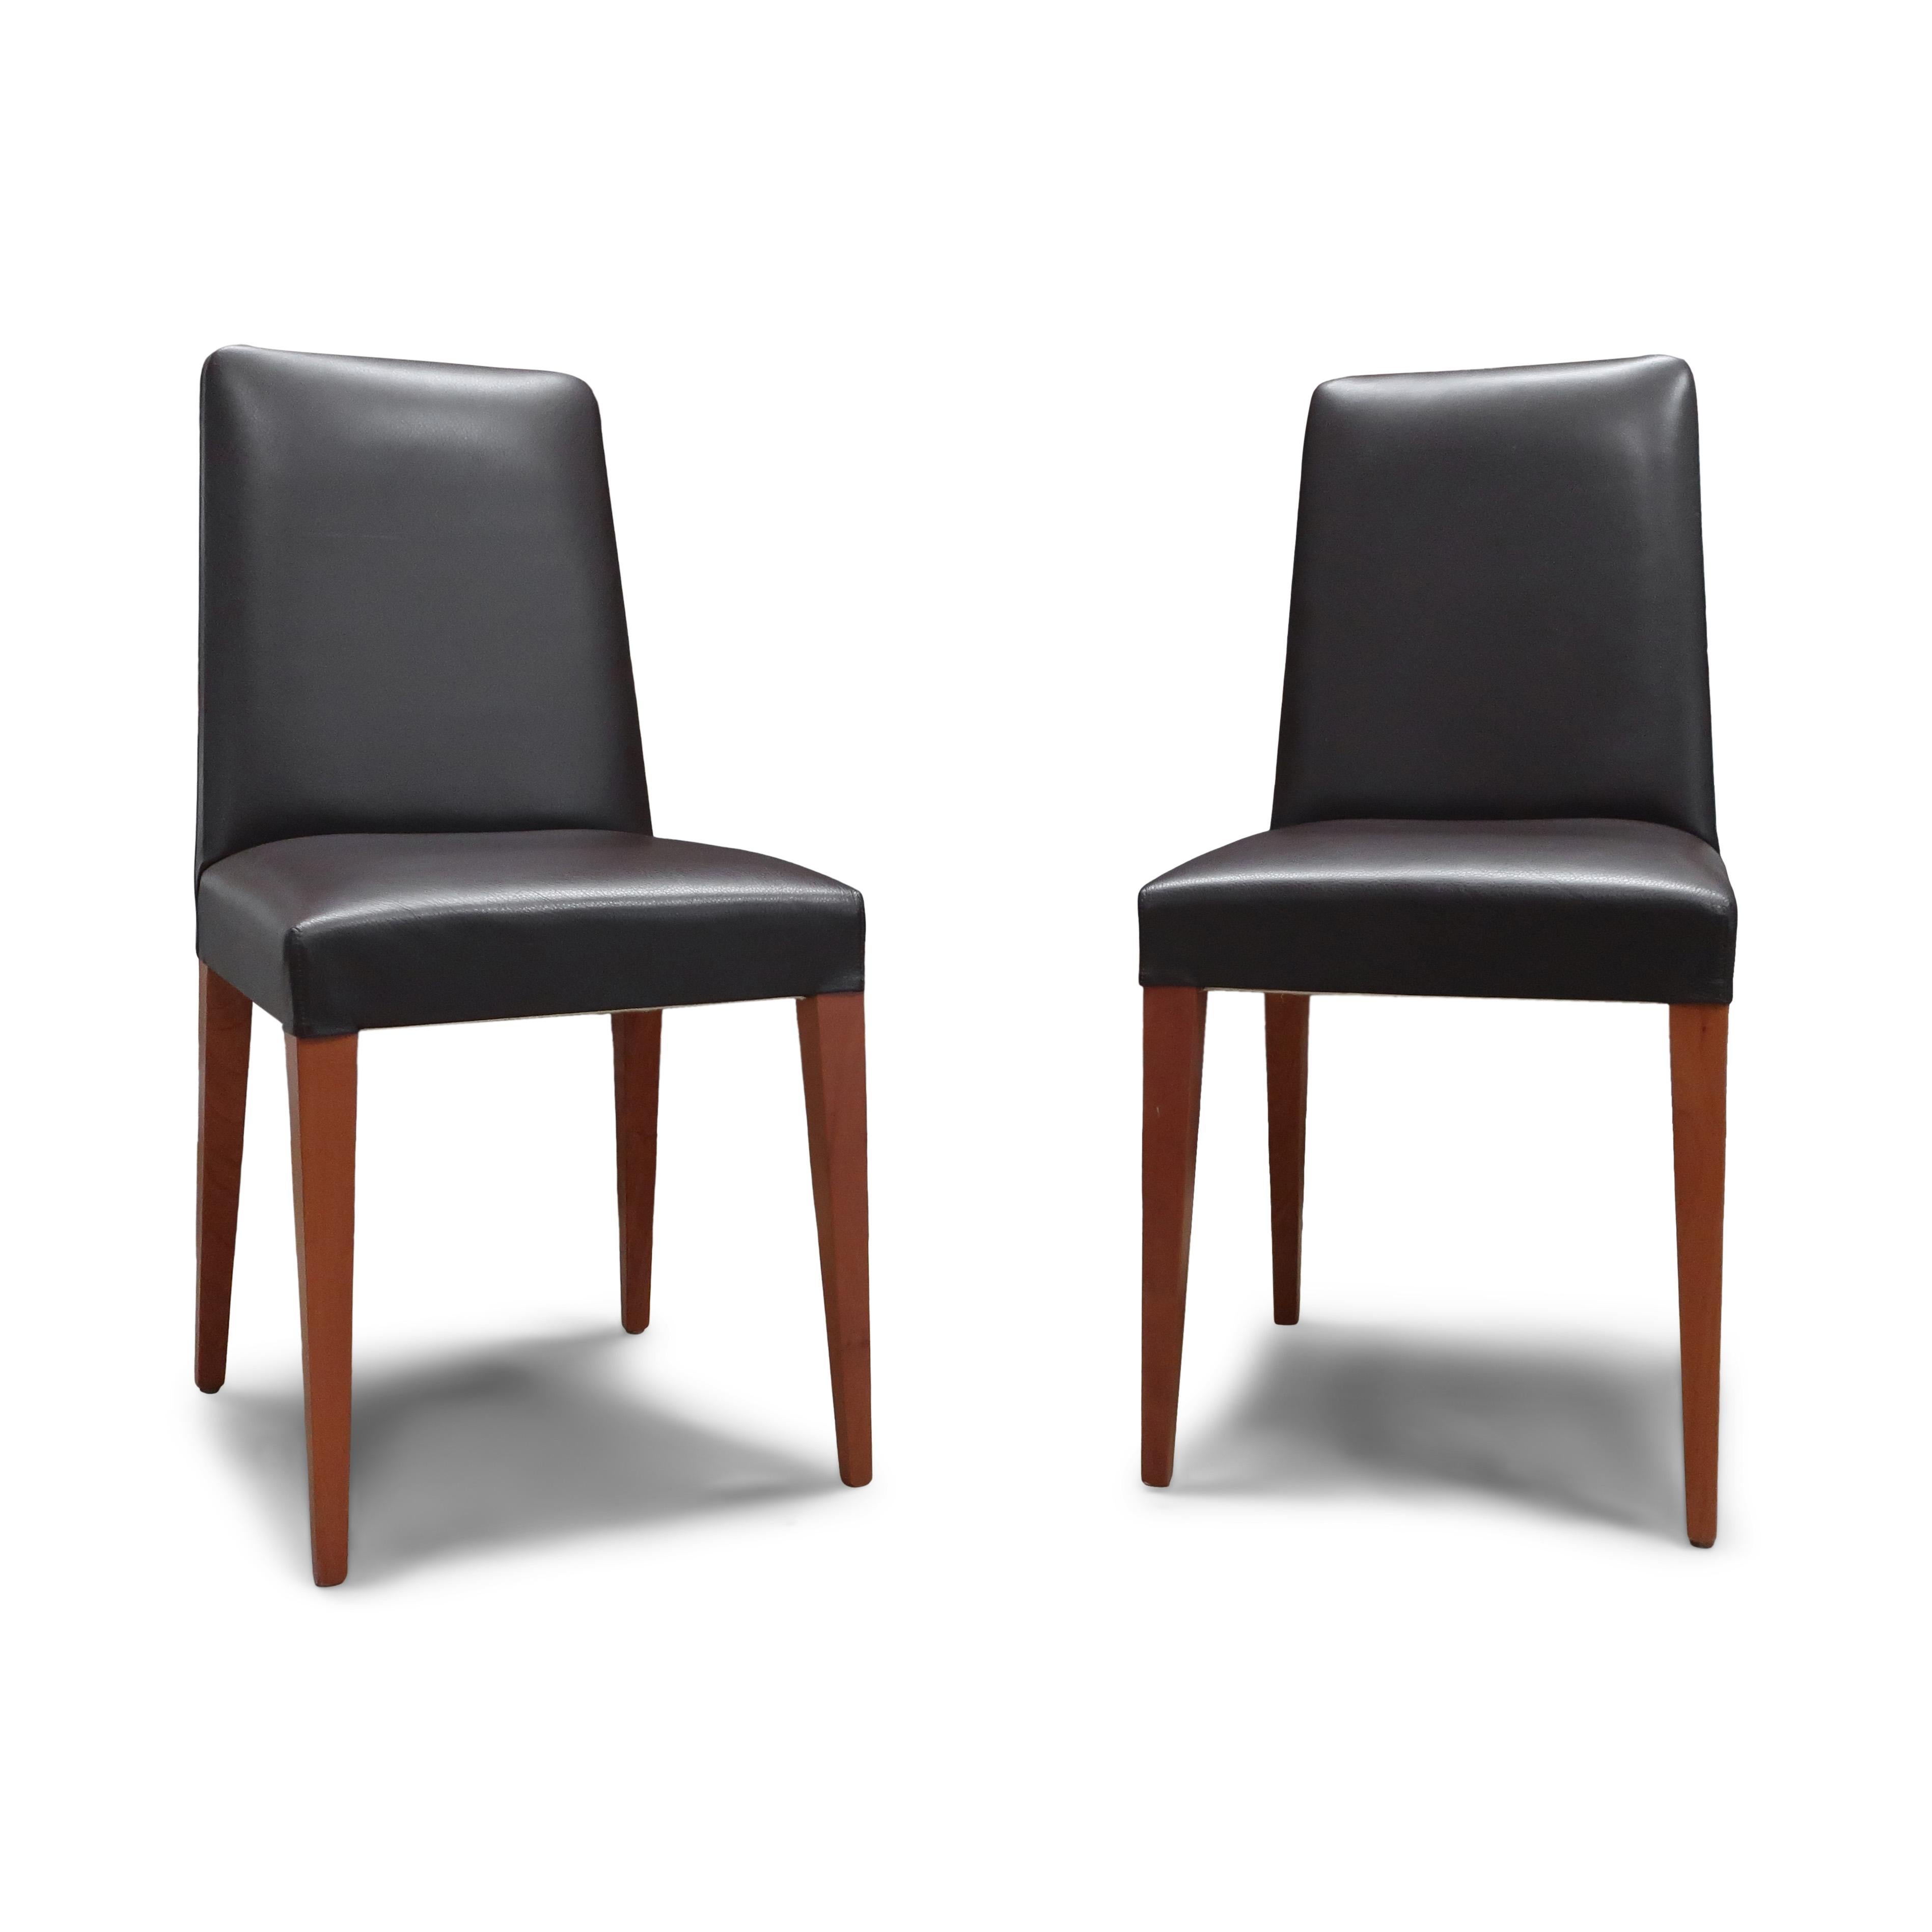 As its name itself suggests, this pair of chairs are one of Ceccotti Collezioni's timeless classics. Designed by the company's celebrated artistic director Roberto Lazzeroni in 2001, the 